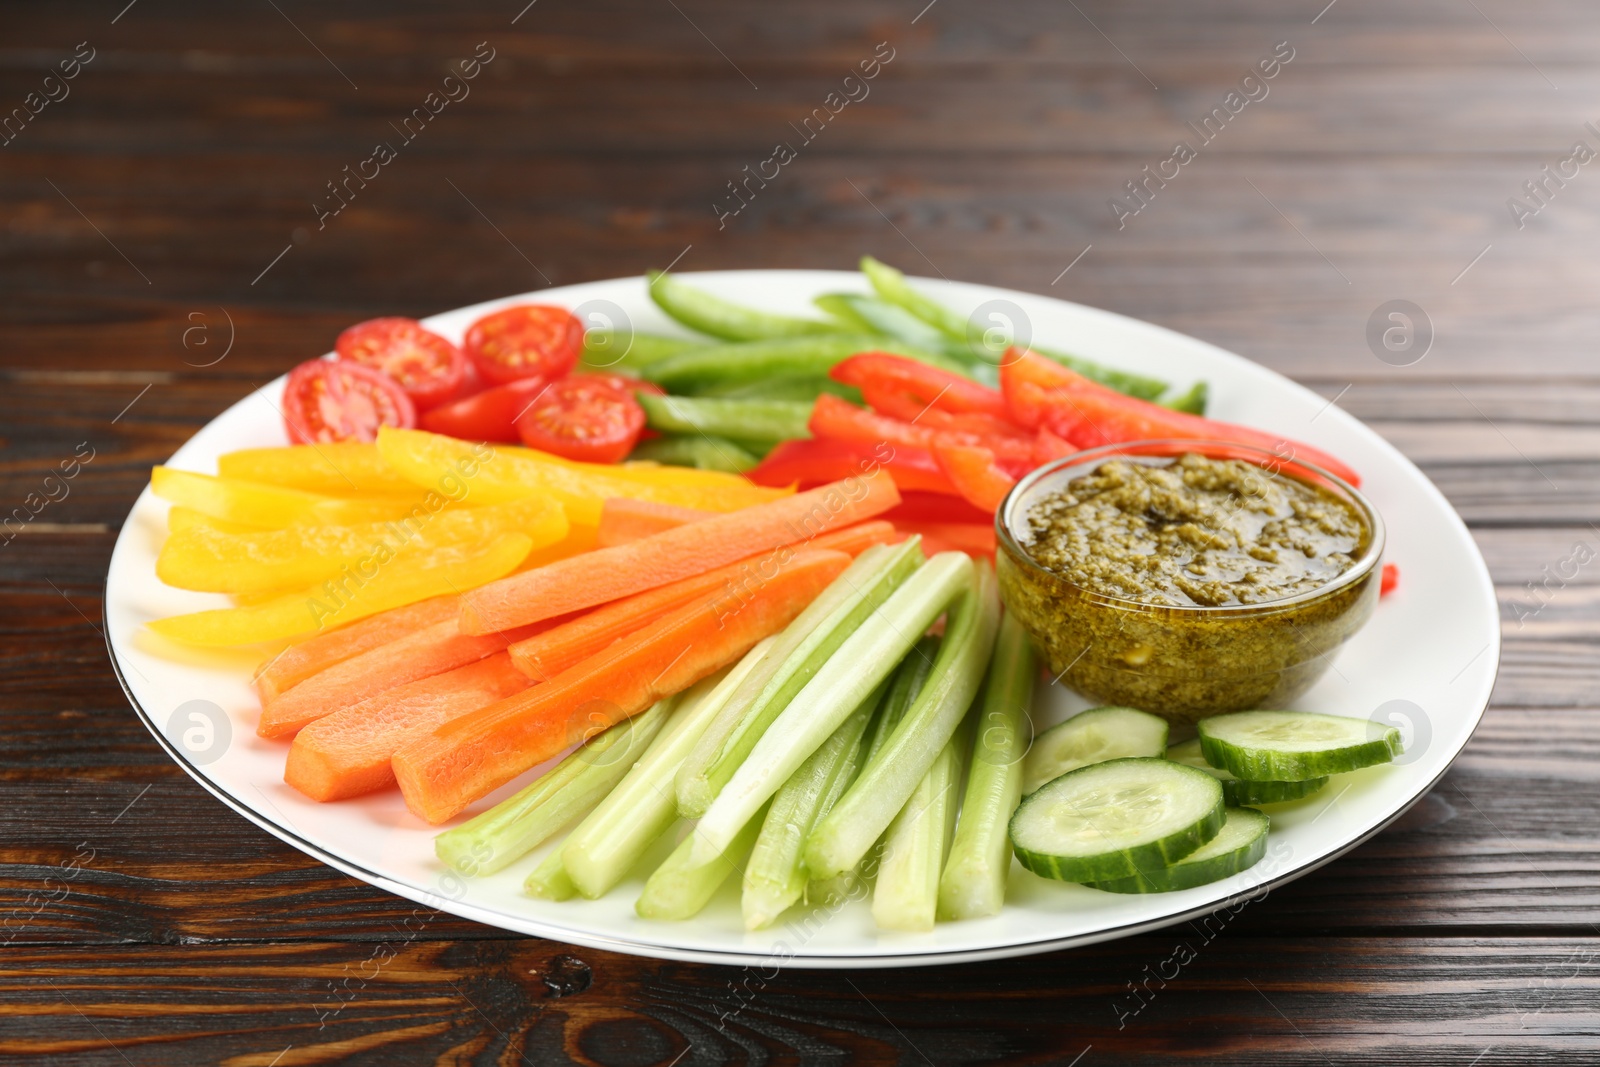 Photo of Celery and other vegetable sticks with dip sauce on wooden table